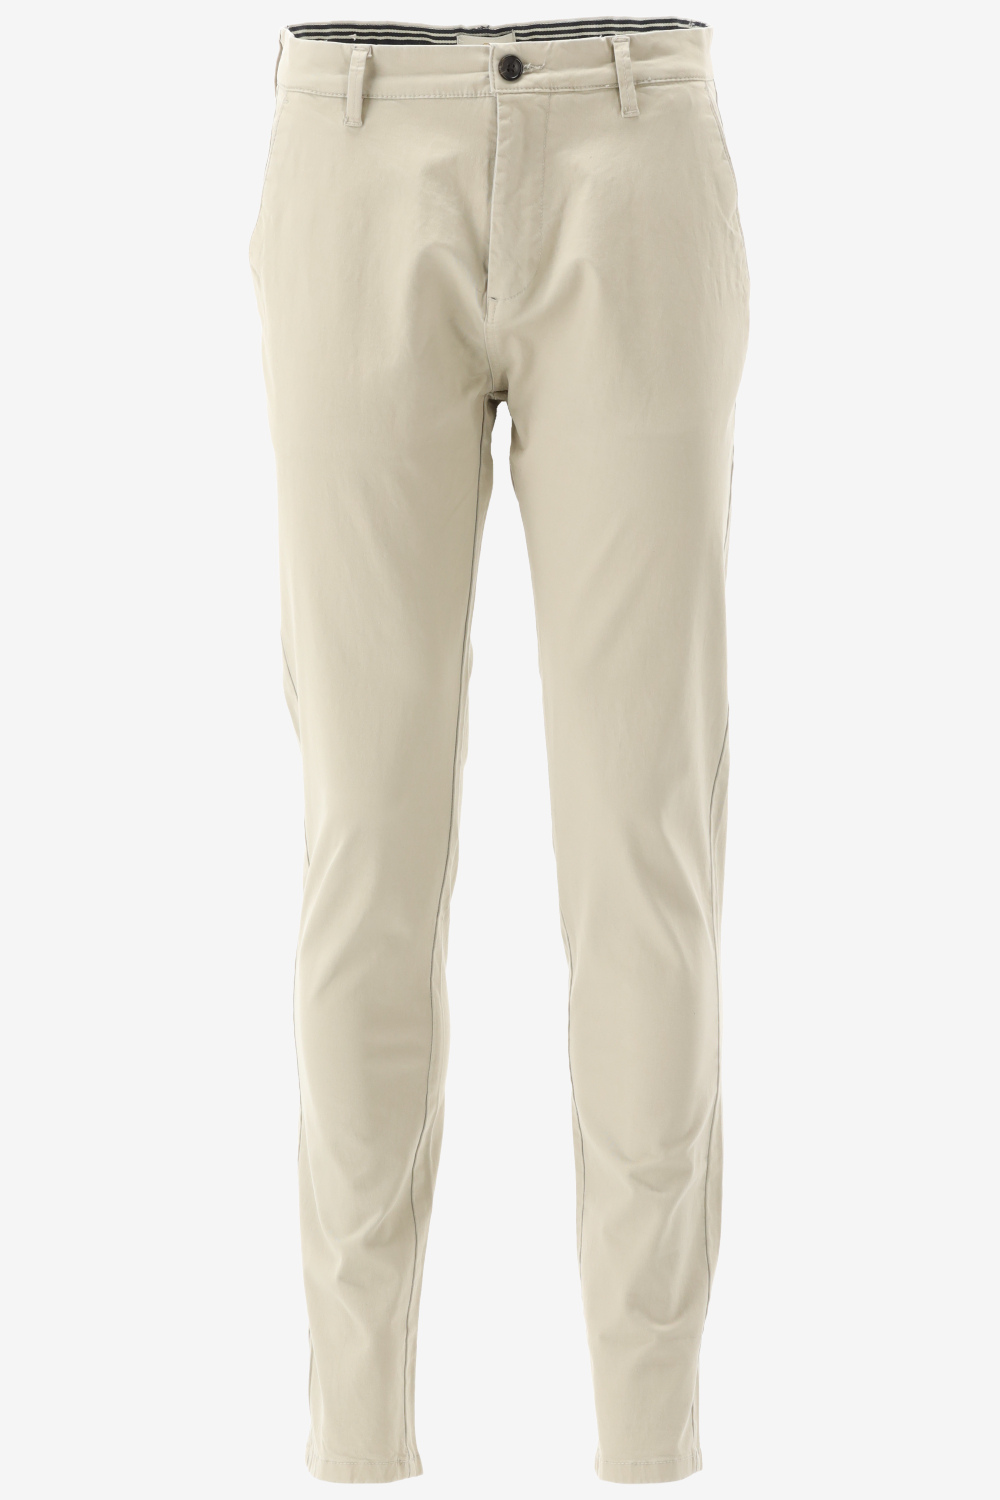 Dstrezzed chino charlie maat 29-L34